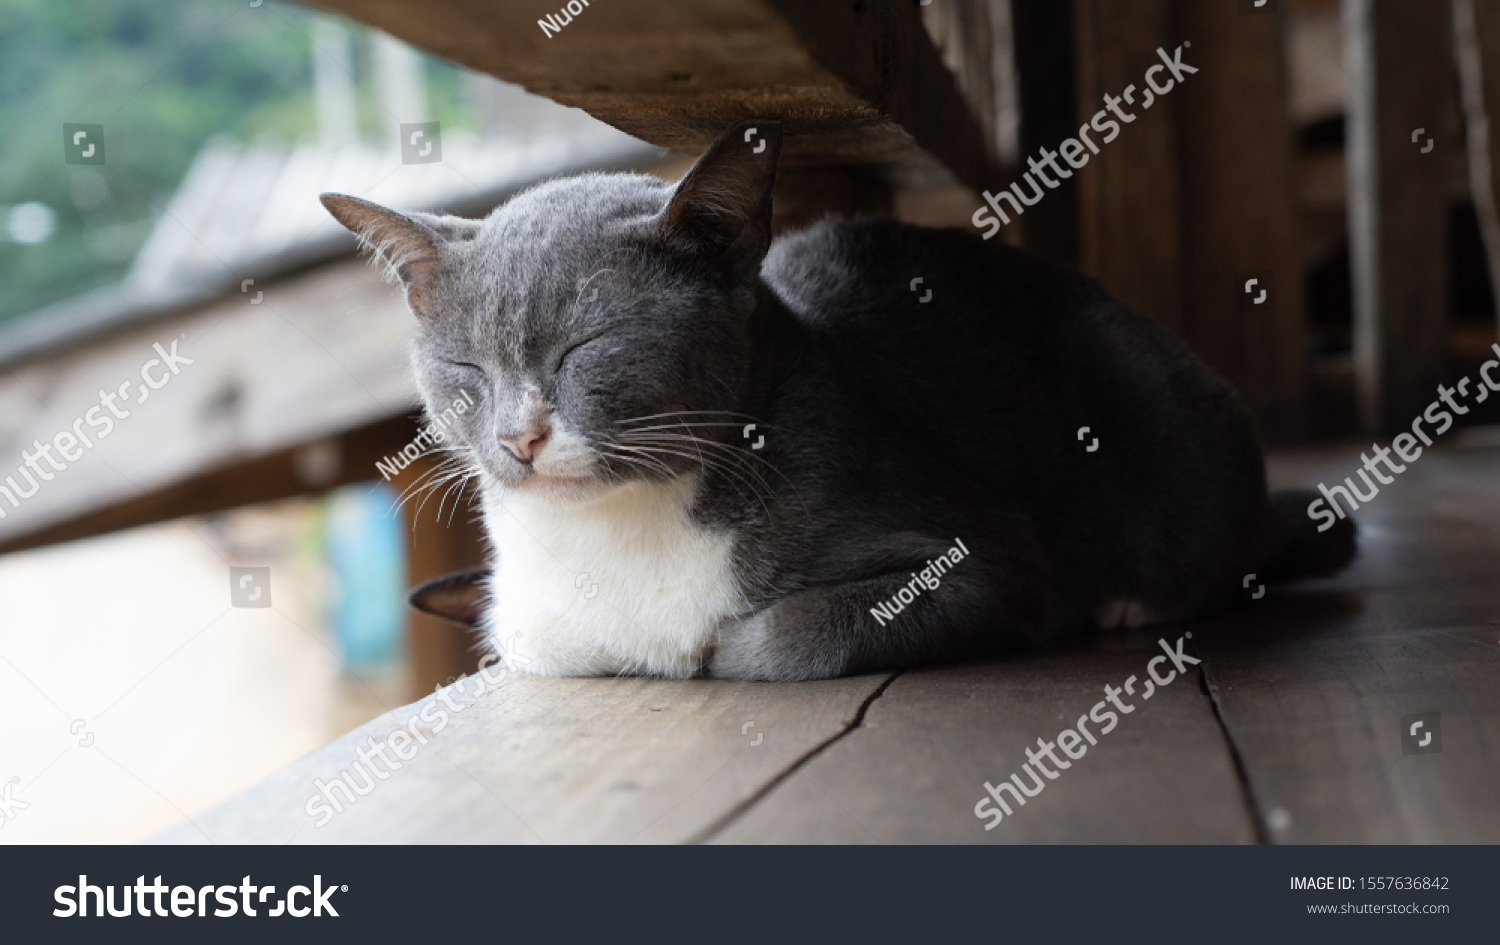 Black White Fat Cats Closing Their Stock Photo Edit Now 1557636842,Butter Chicken Recipe Ingredients